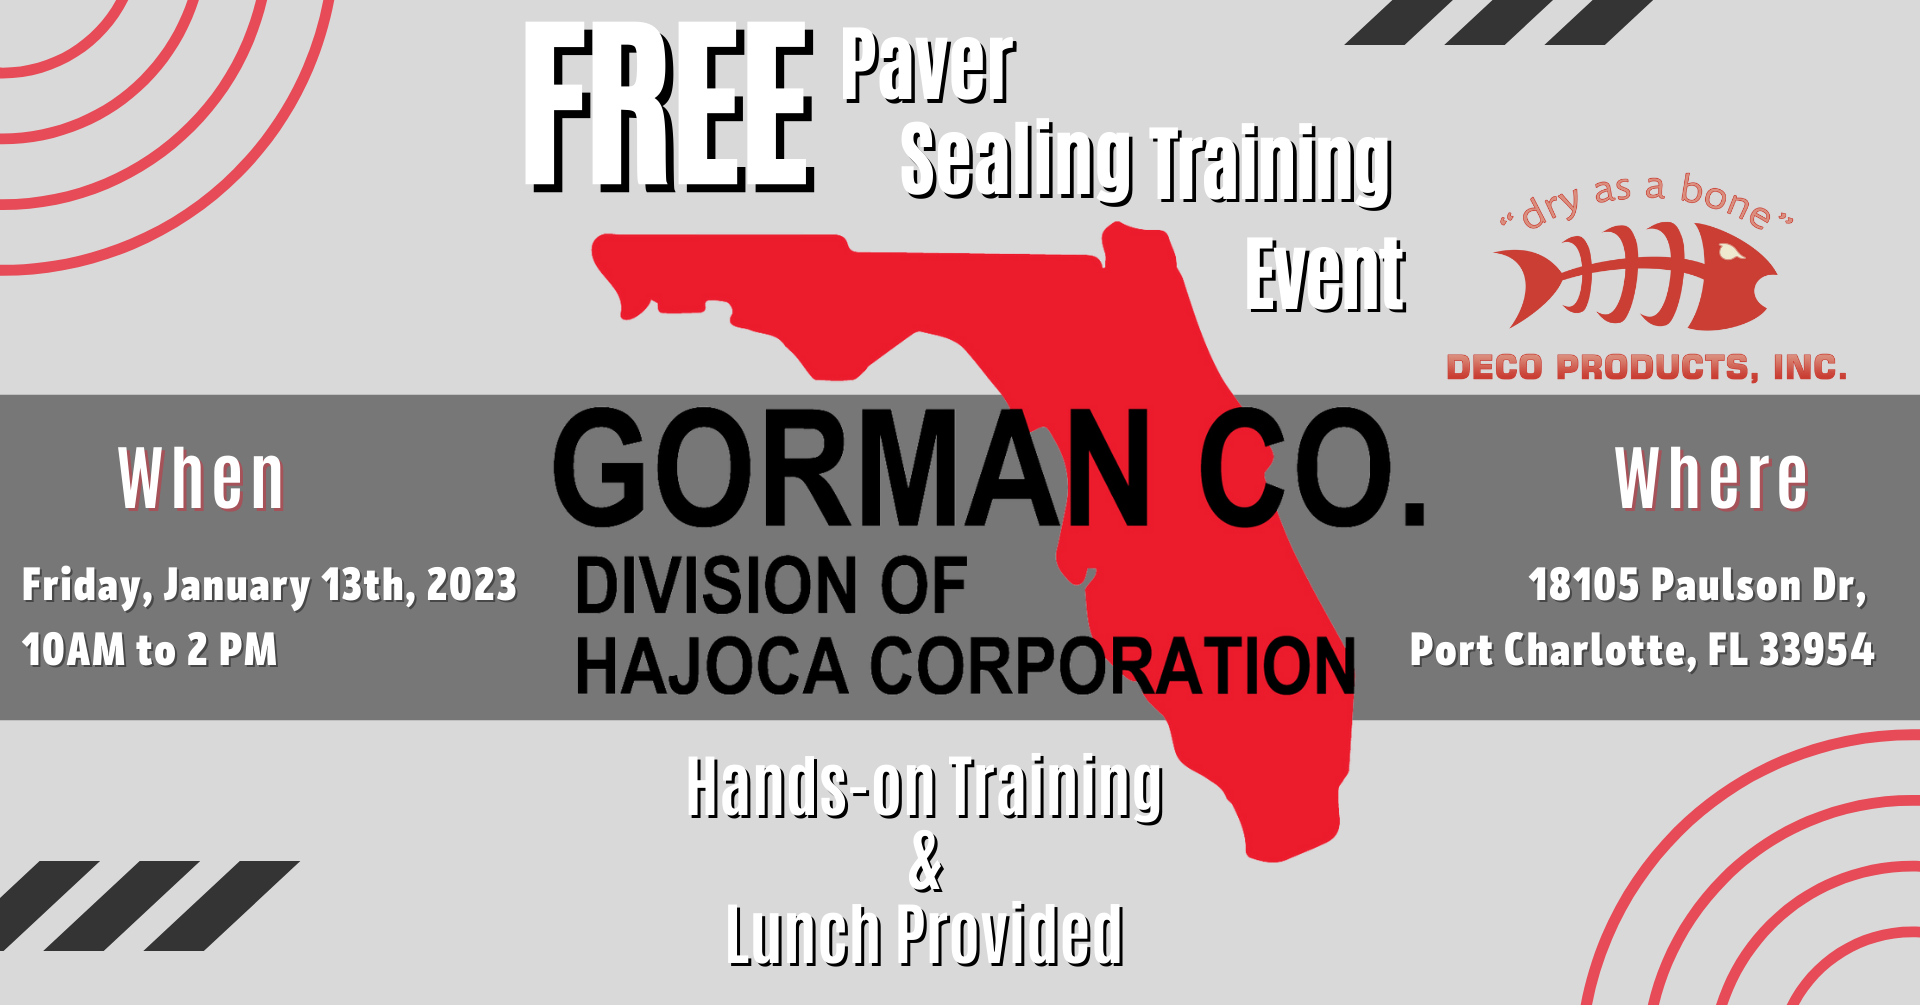 a flyer promoting a free paver sealing training event